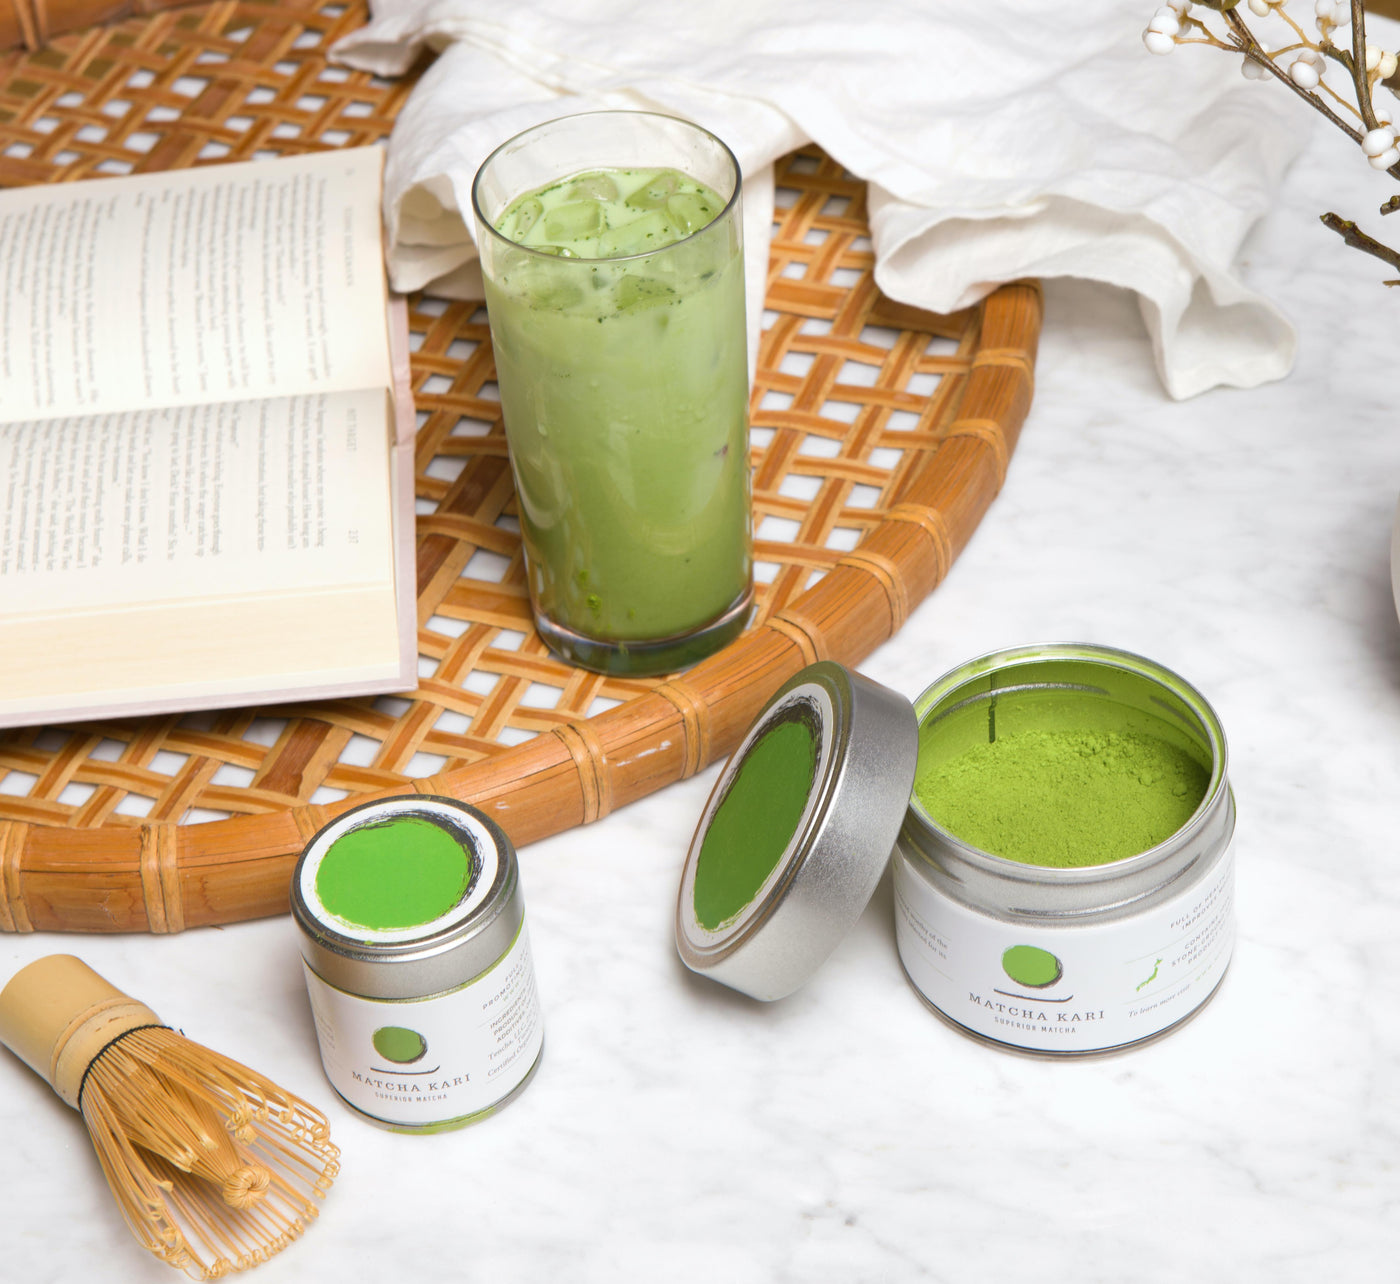  the male-specific health benefits of drinking matcha green tea. Matcha for men's health.